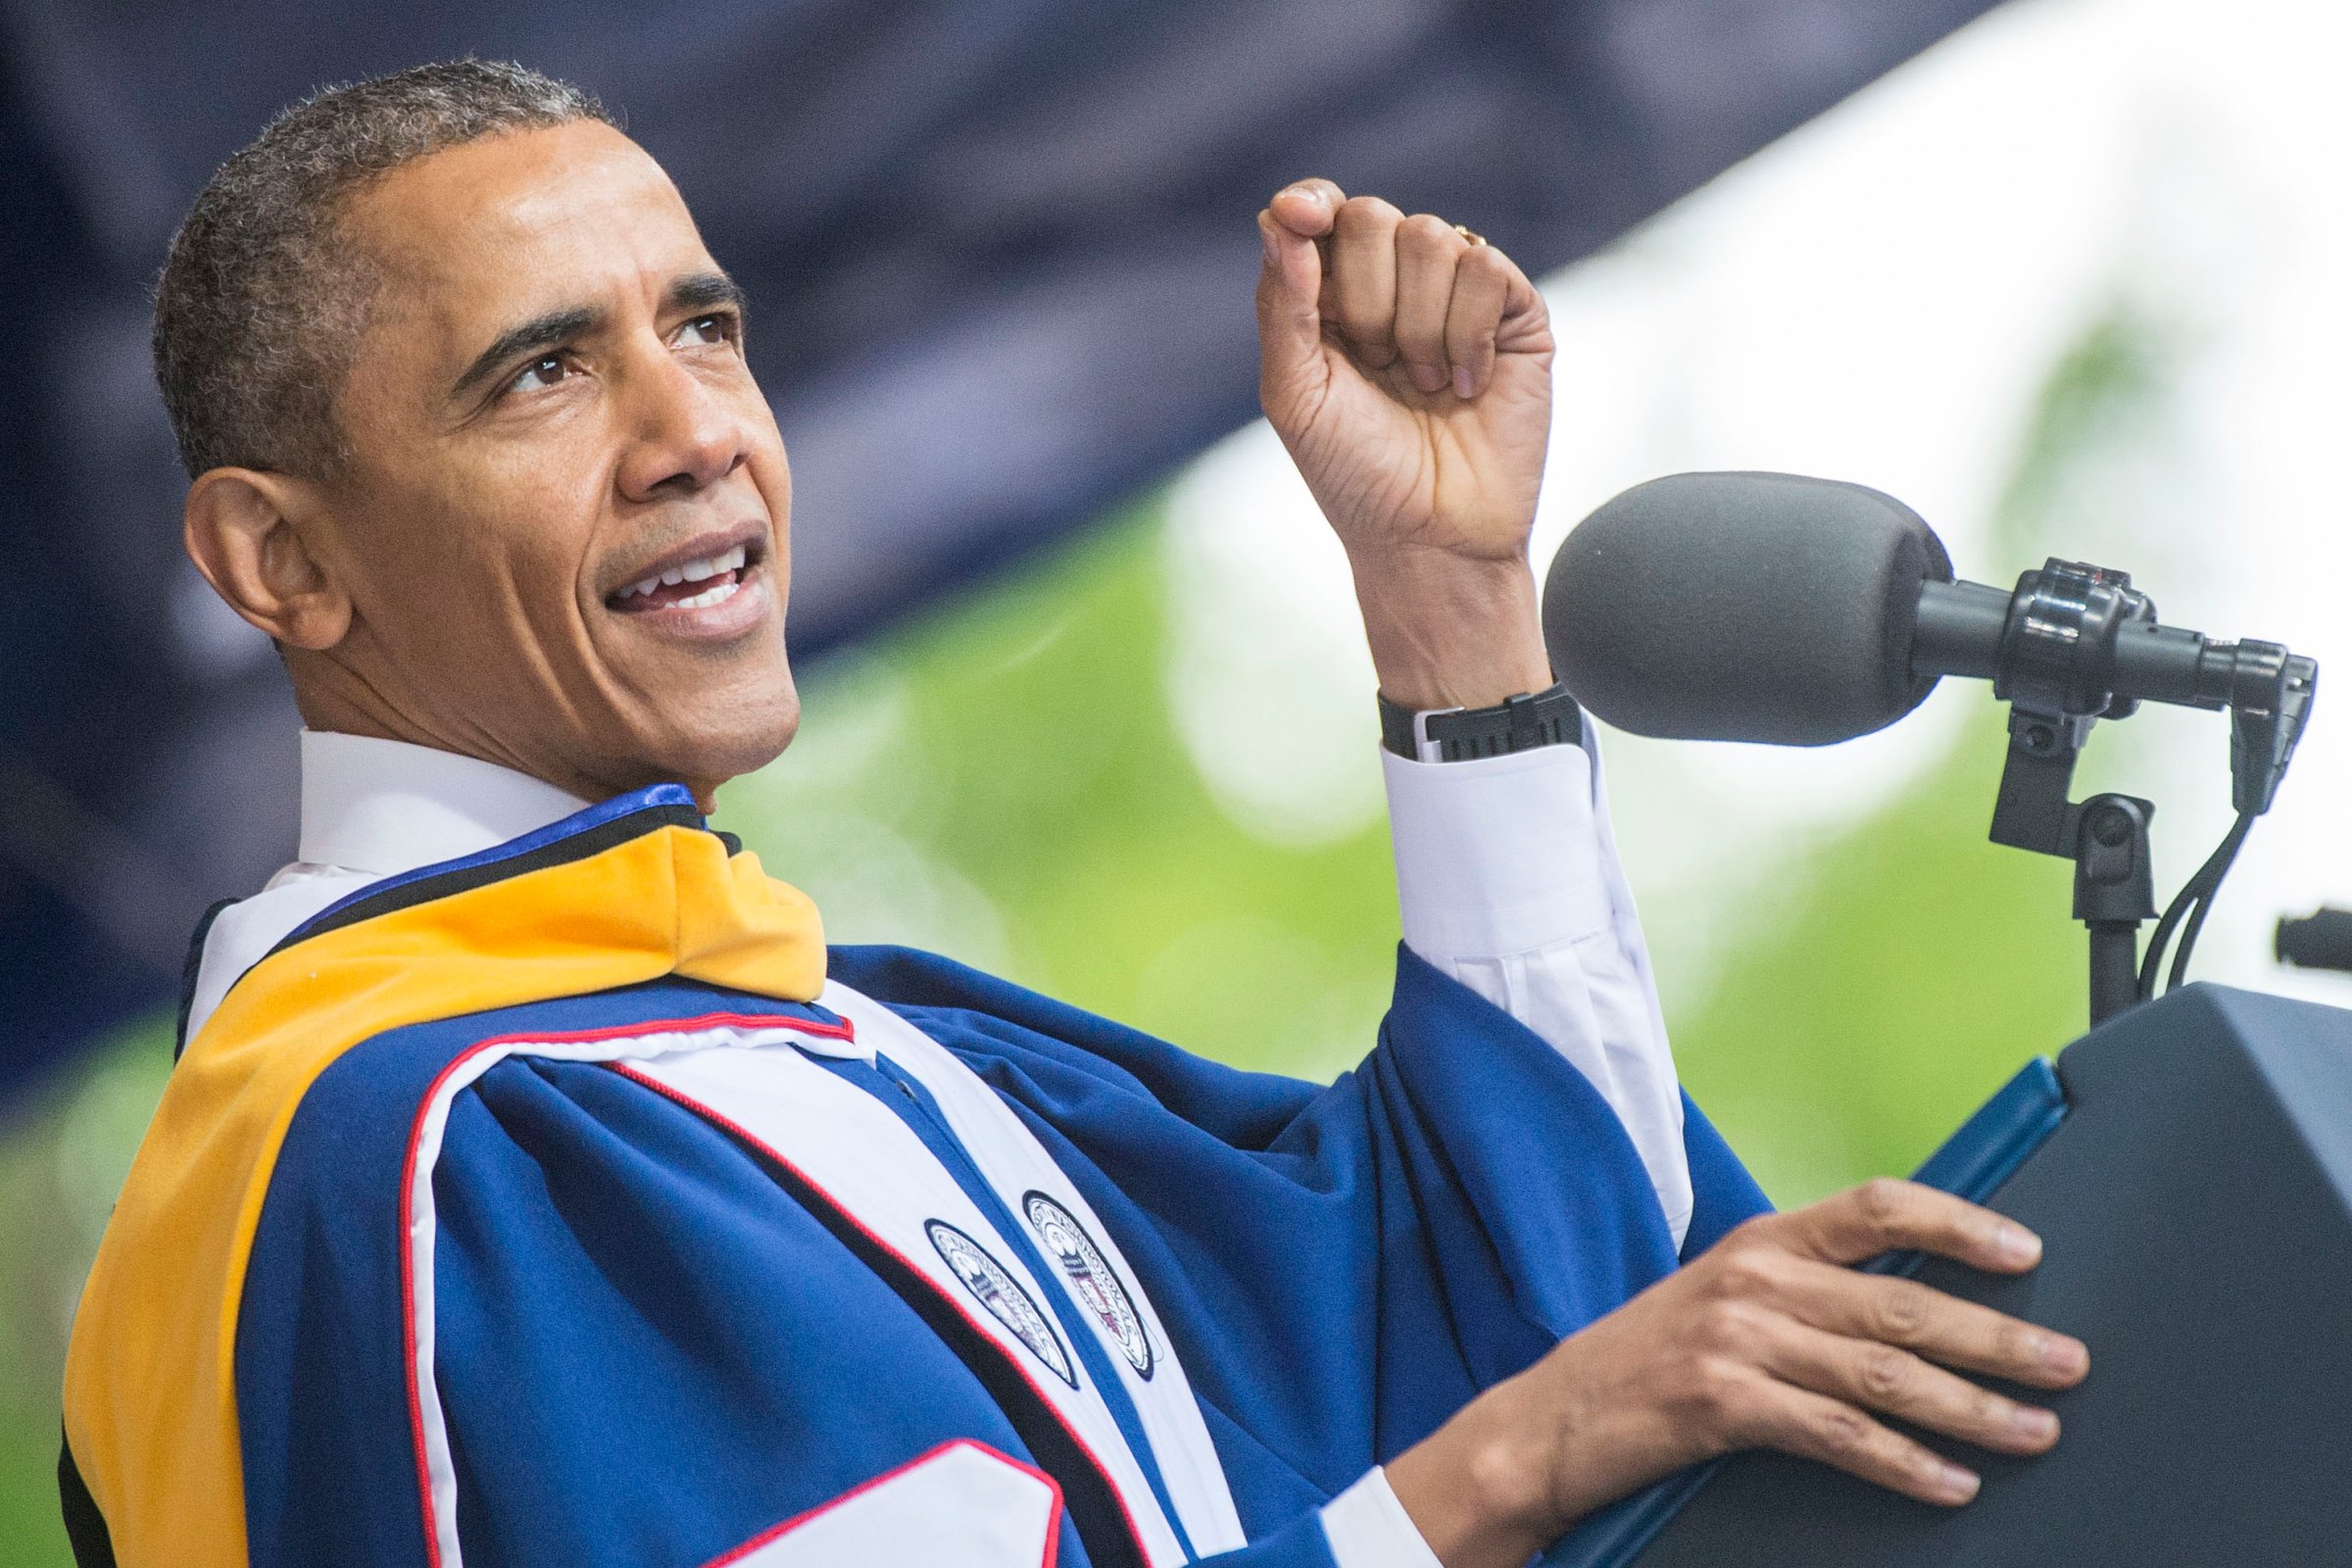 Barack Obama speaks during the 148th commencement ceremony at Howard University in Washington, D.C. on May 7, 2016.